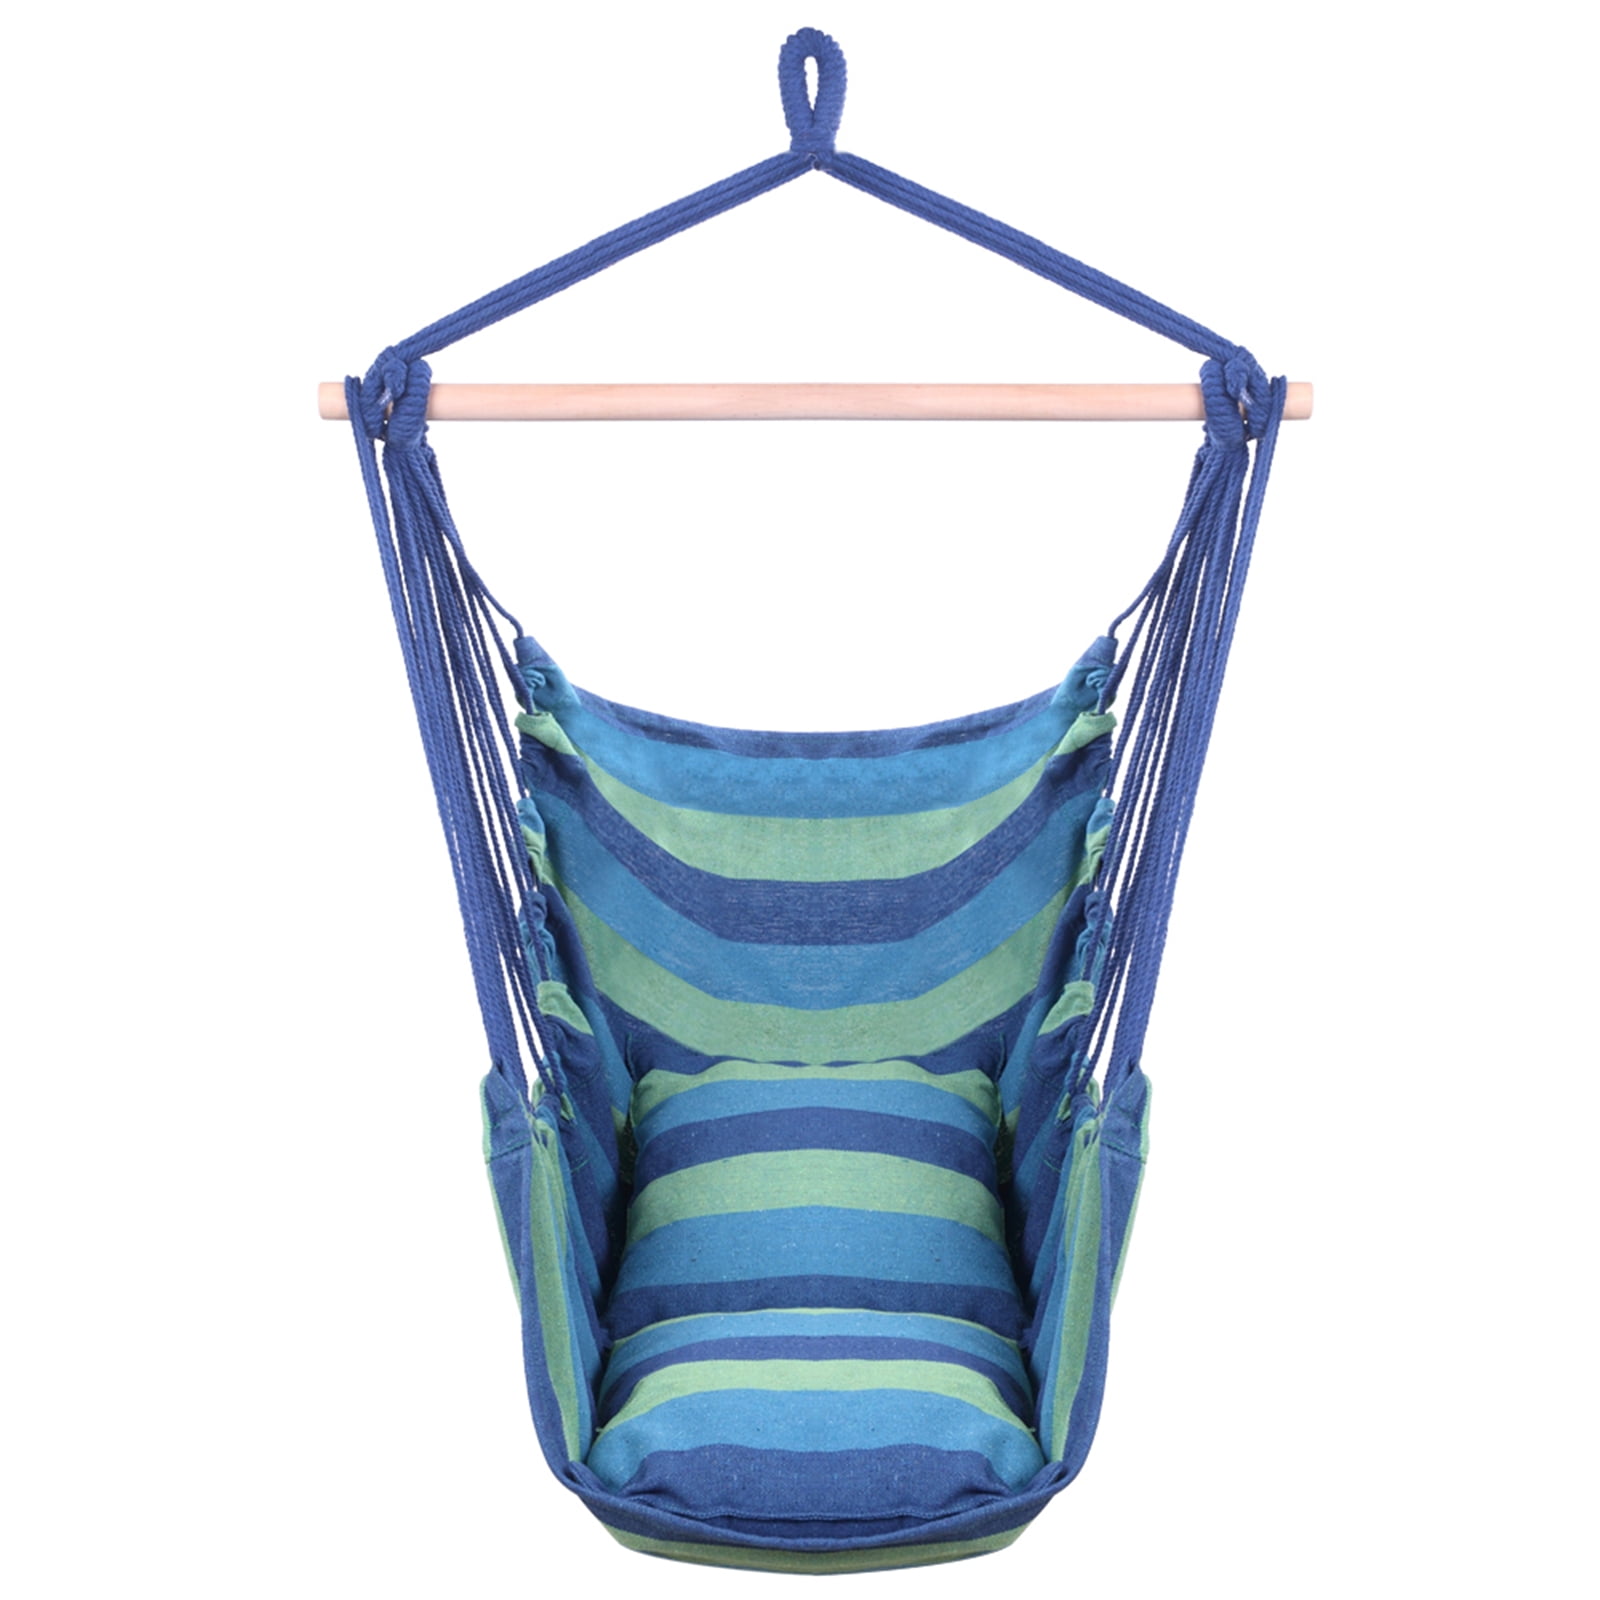 Details about  / Hanging Rope Hammock Chair Porch Swing Seat Net Chair Swing Cotton Porch Chair